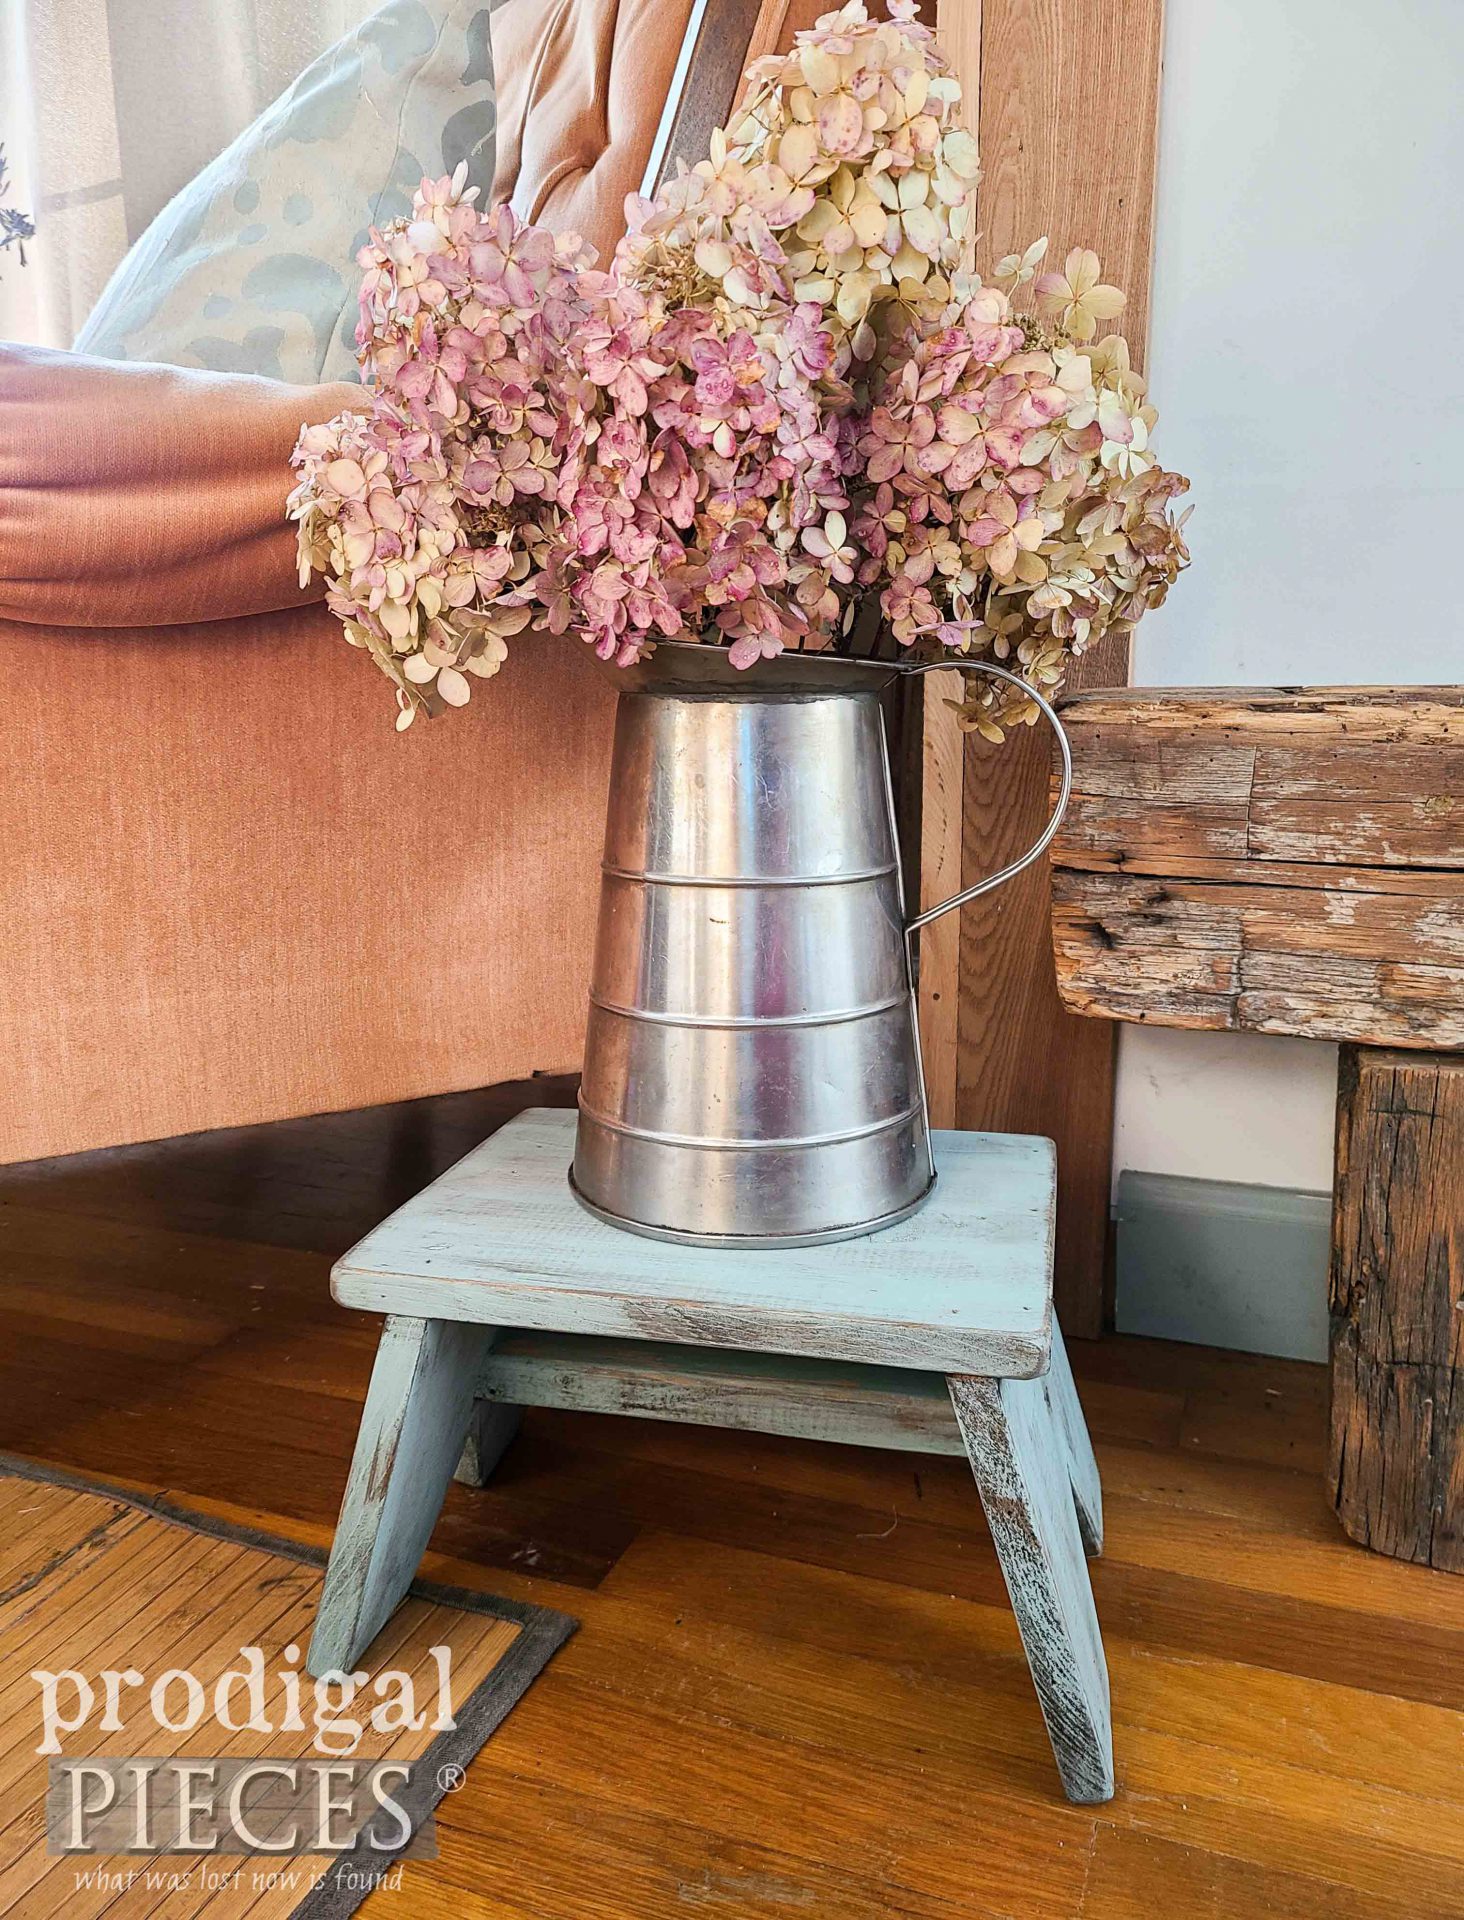 Chippy Blue Farmhouse Wooden Riser Stool from a Heart Cut-Out Furniture Upcycle by Larissa of Prodigal Pieces | prodigalpieces.com #prodigalpieces #farmhouse #diy #home #furniture